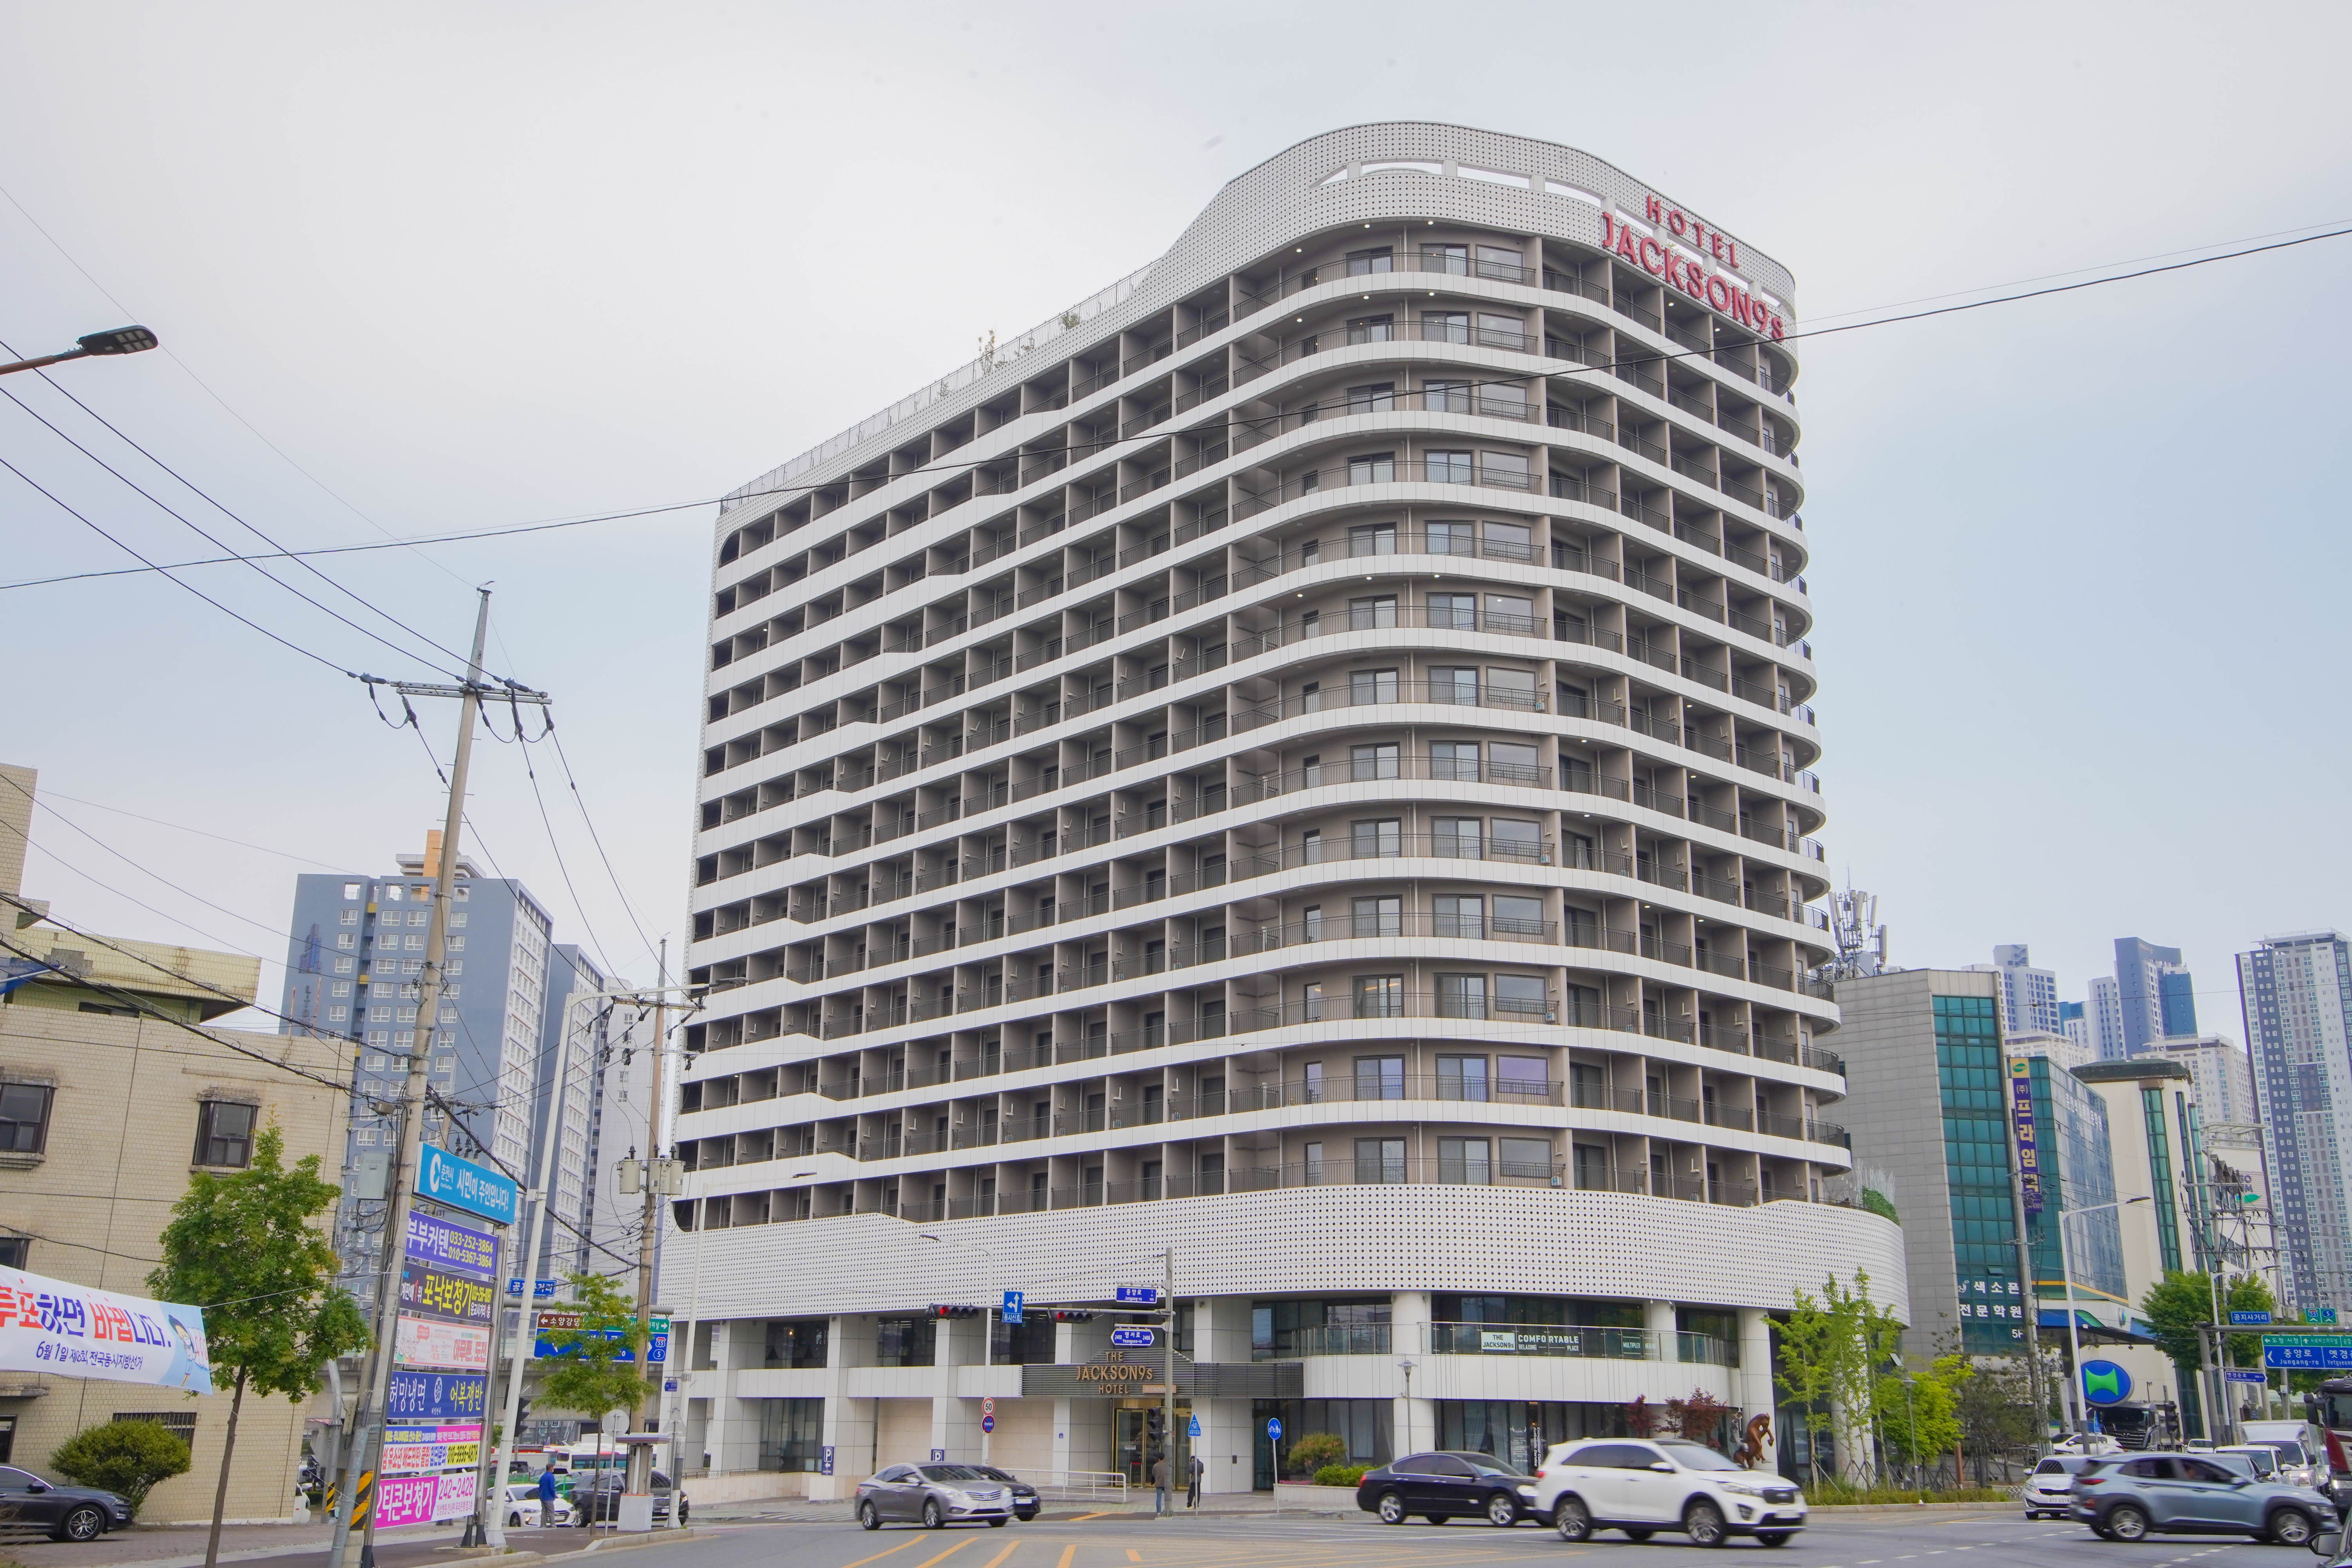 [KQ-Chelin Guide] Healing and Workation? Visit The Jackson9s Hotel, Chuncheon